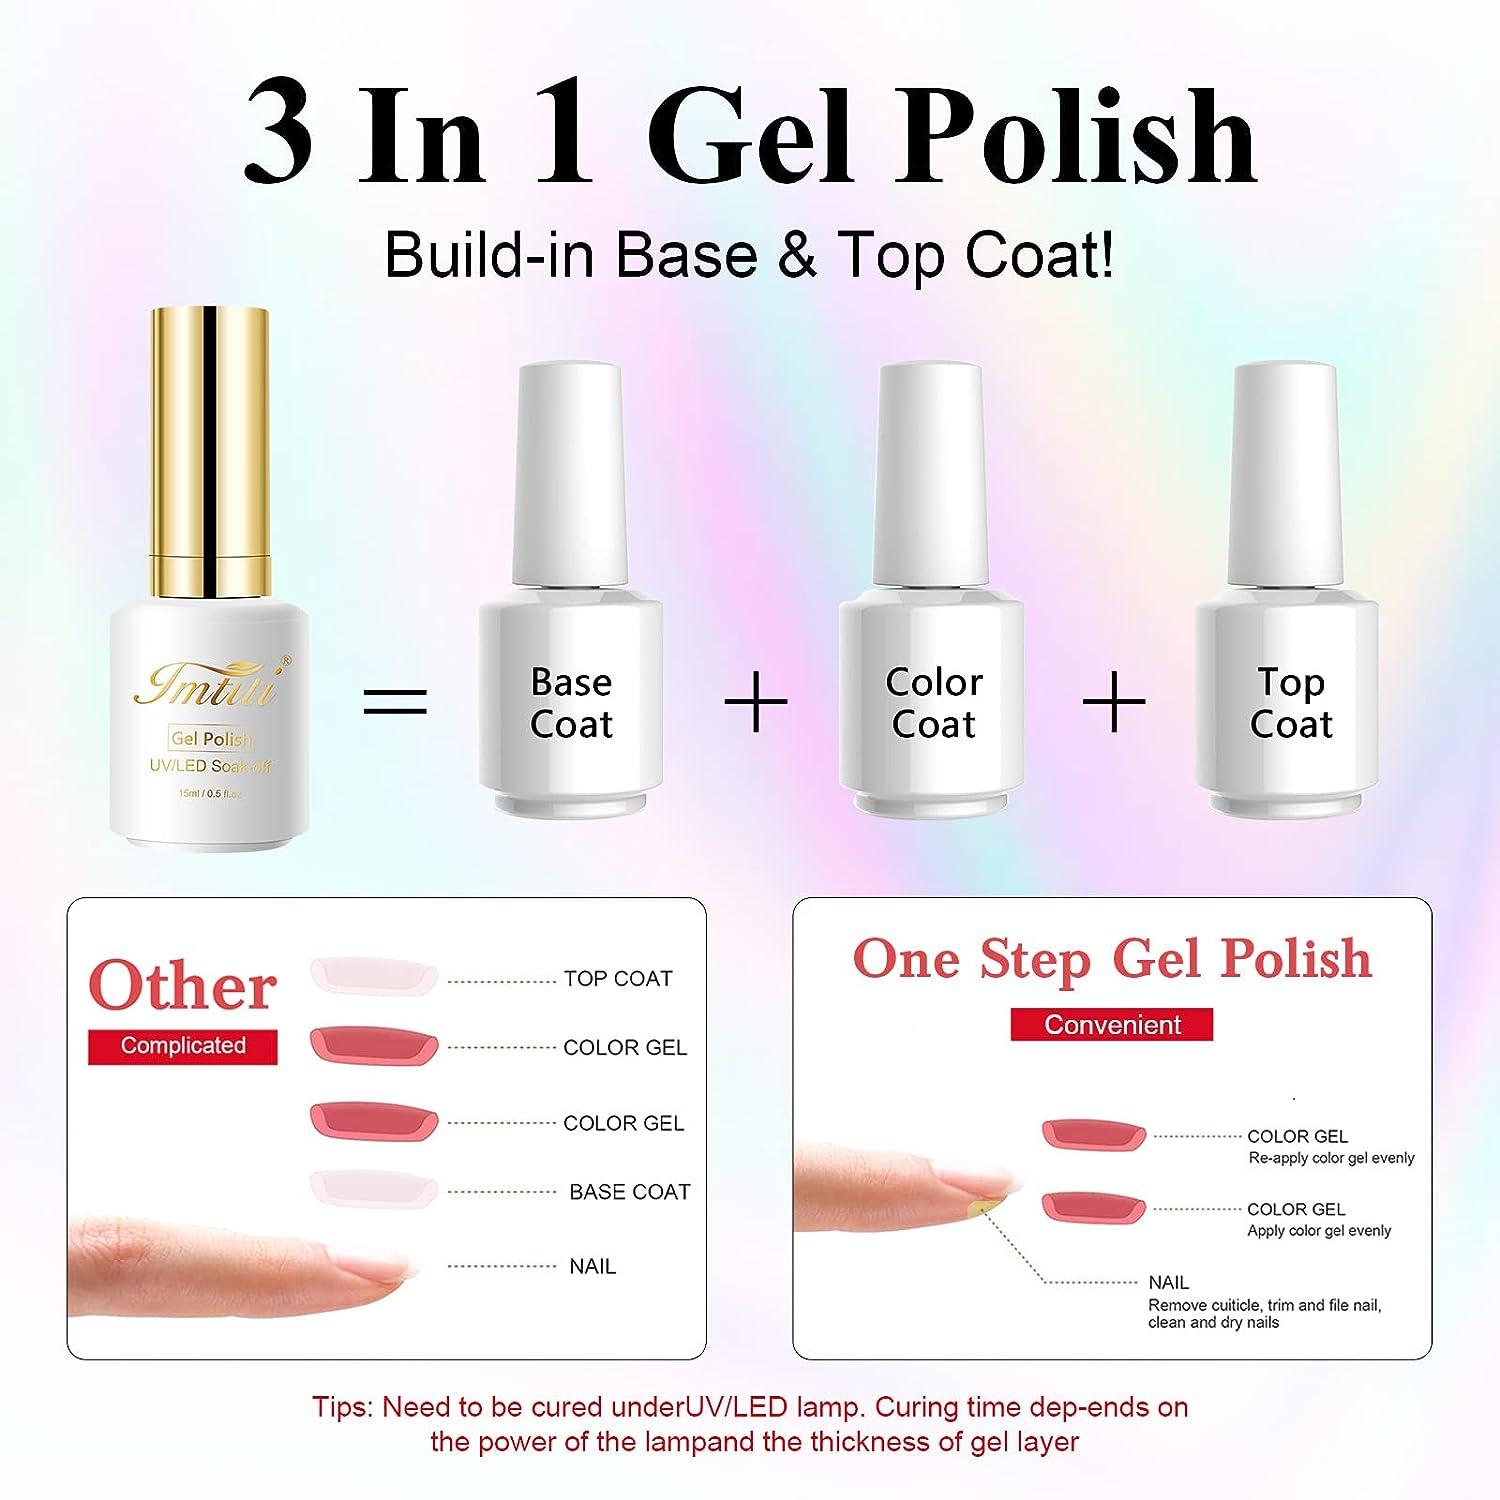 Buy the Best Glitter Nail Polishes in India at Amazing Prices